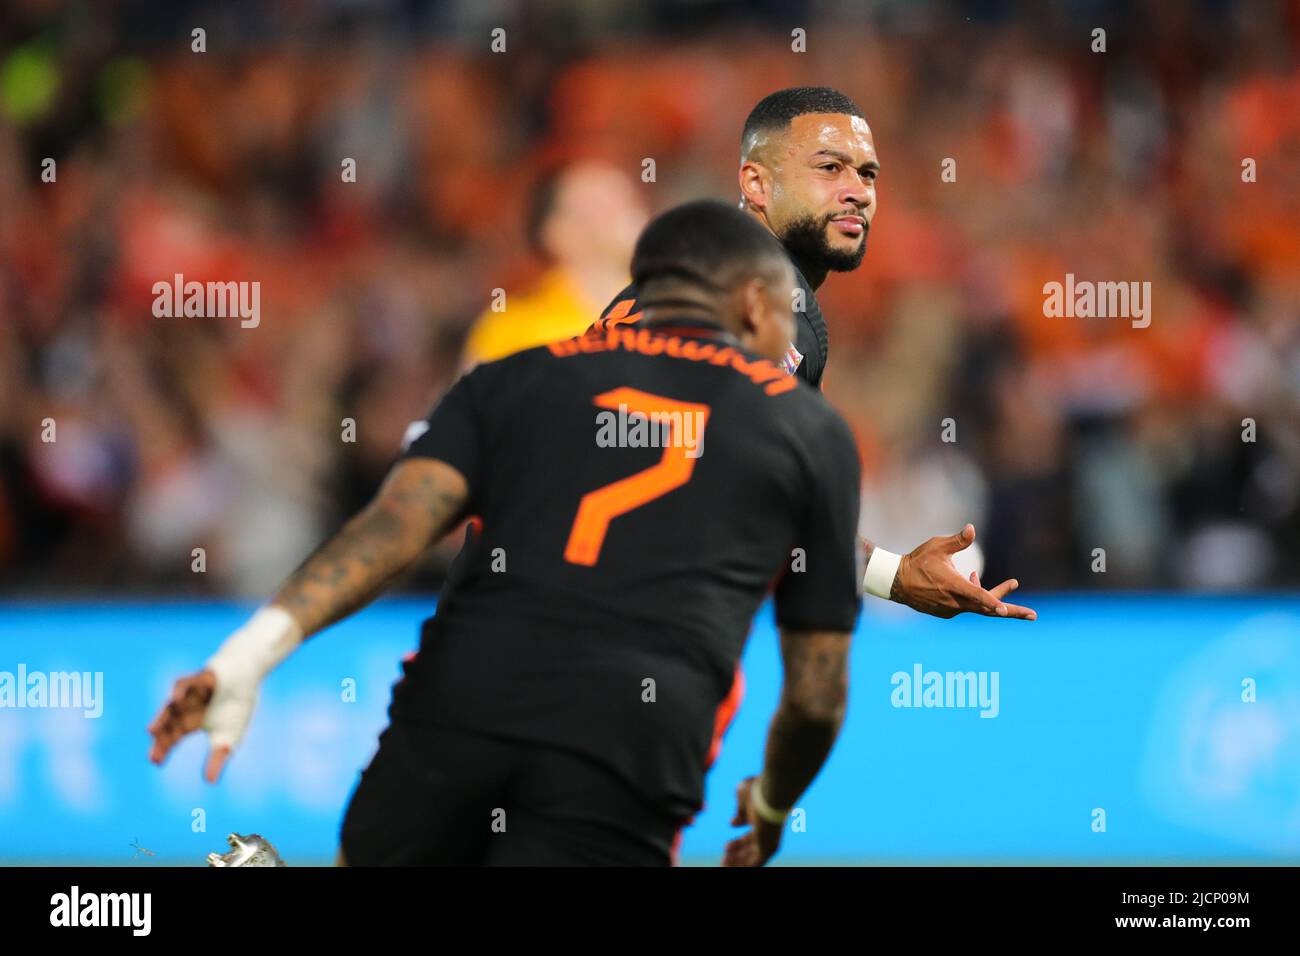 Rotterdam, Netherlands. 14th June, 2022. Memphis Depay (rear) of the Netherlands celebrates scoring during the football match of Group 4 in League A of the UEFA Nations League between the Netherlands and Wales in Rotterdam, the Netherlands, June 14, 2022. Credit: Zheng Huansong/Xinhua/Alamy Live News Stock Photo